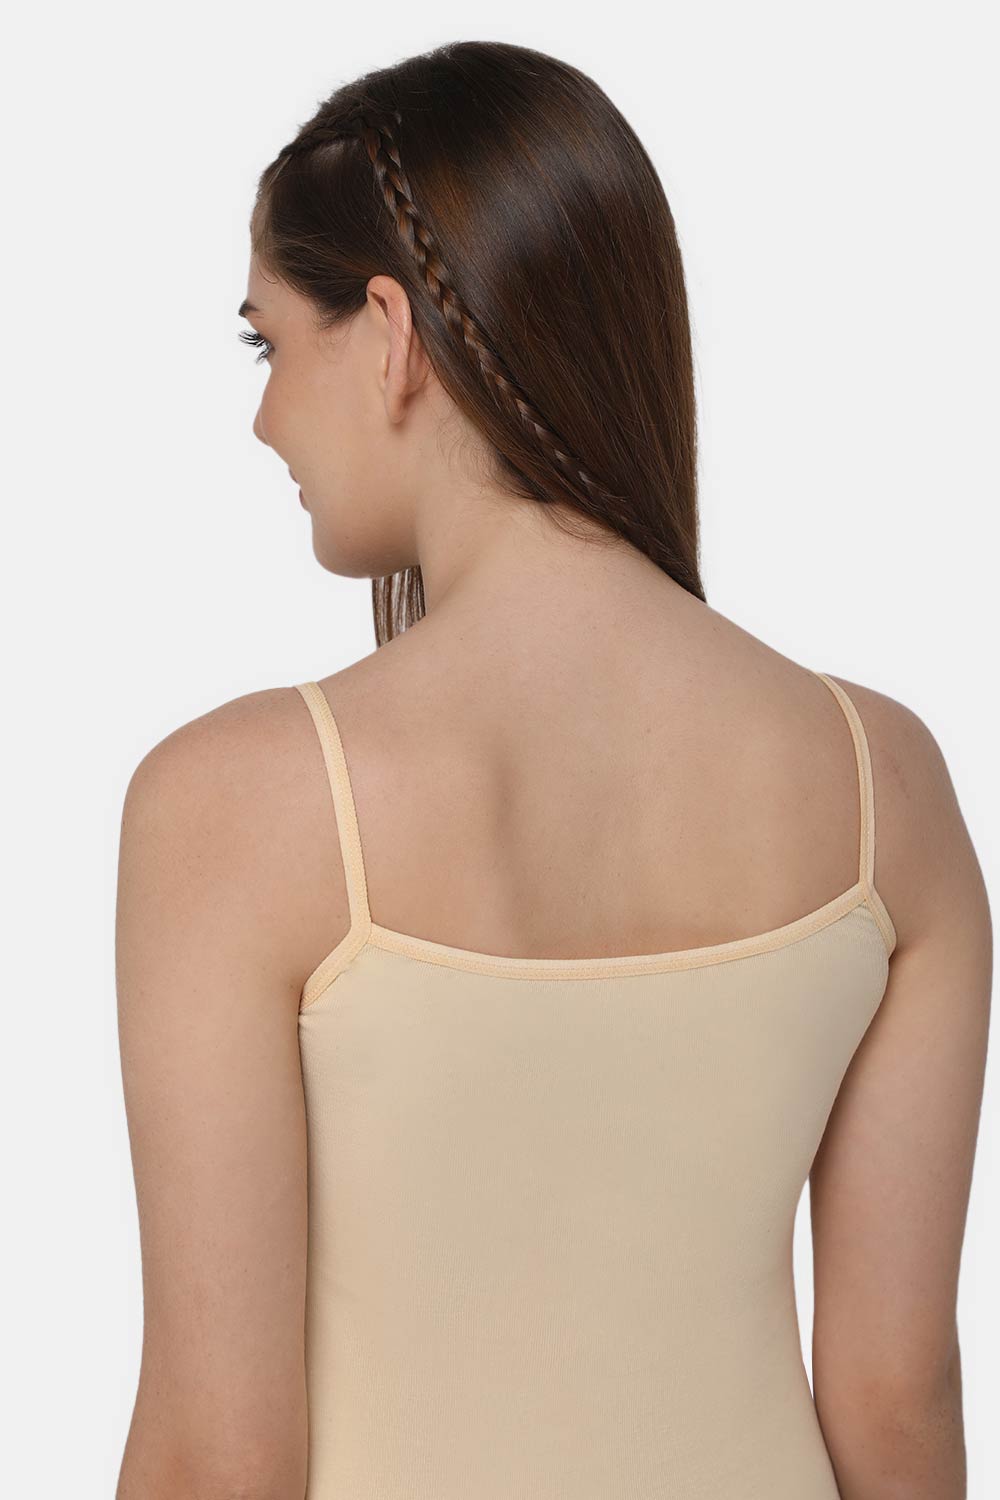 Intimacy Camisole-Slip Special Combo Pack - In02 - Pack of 3 - C63